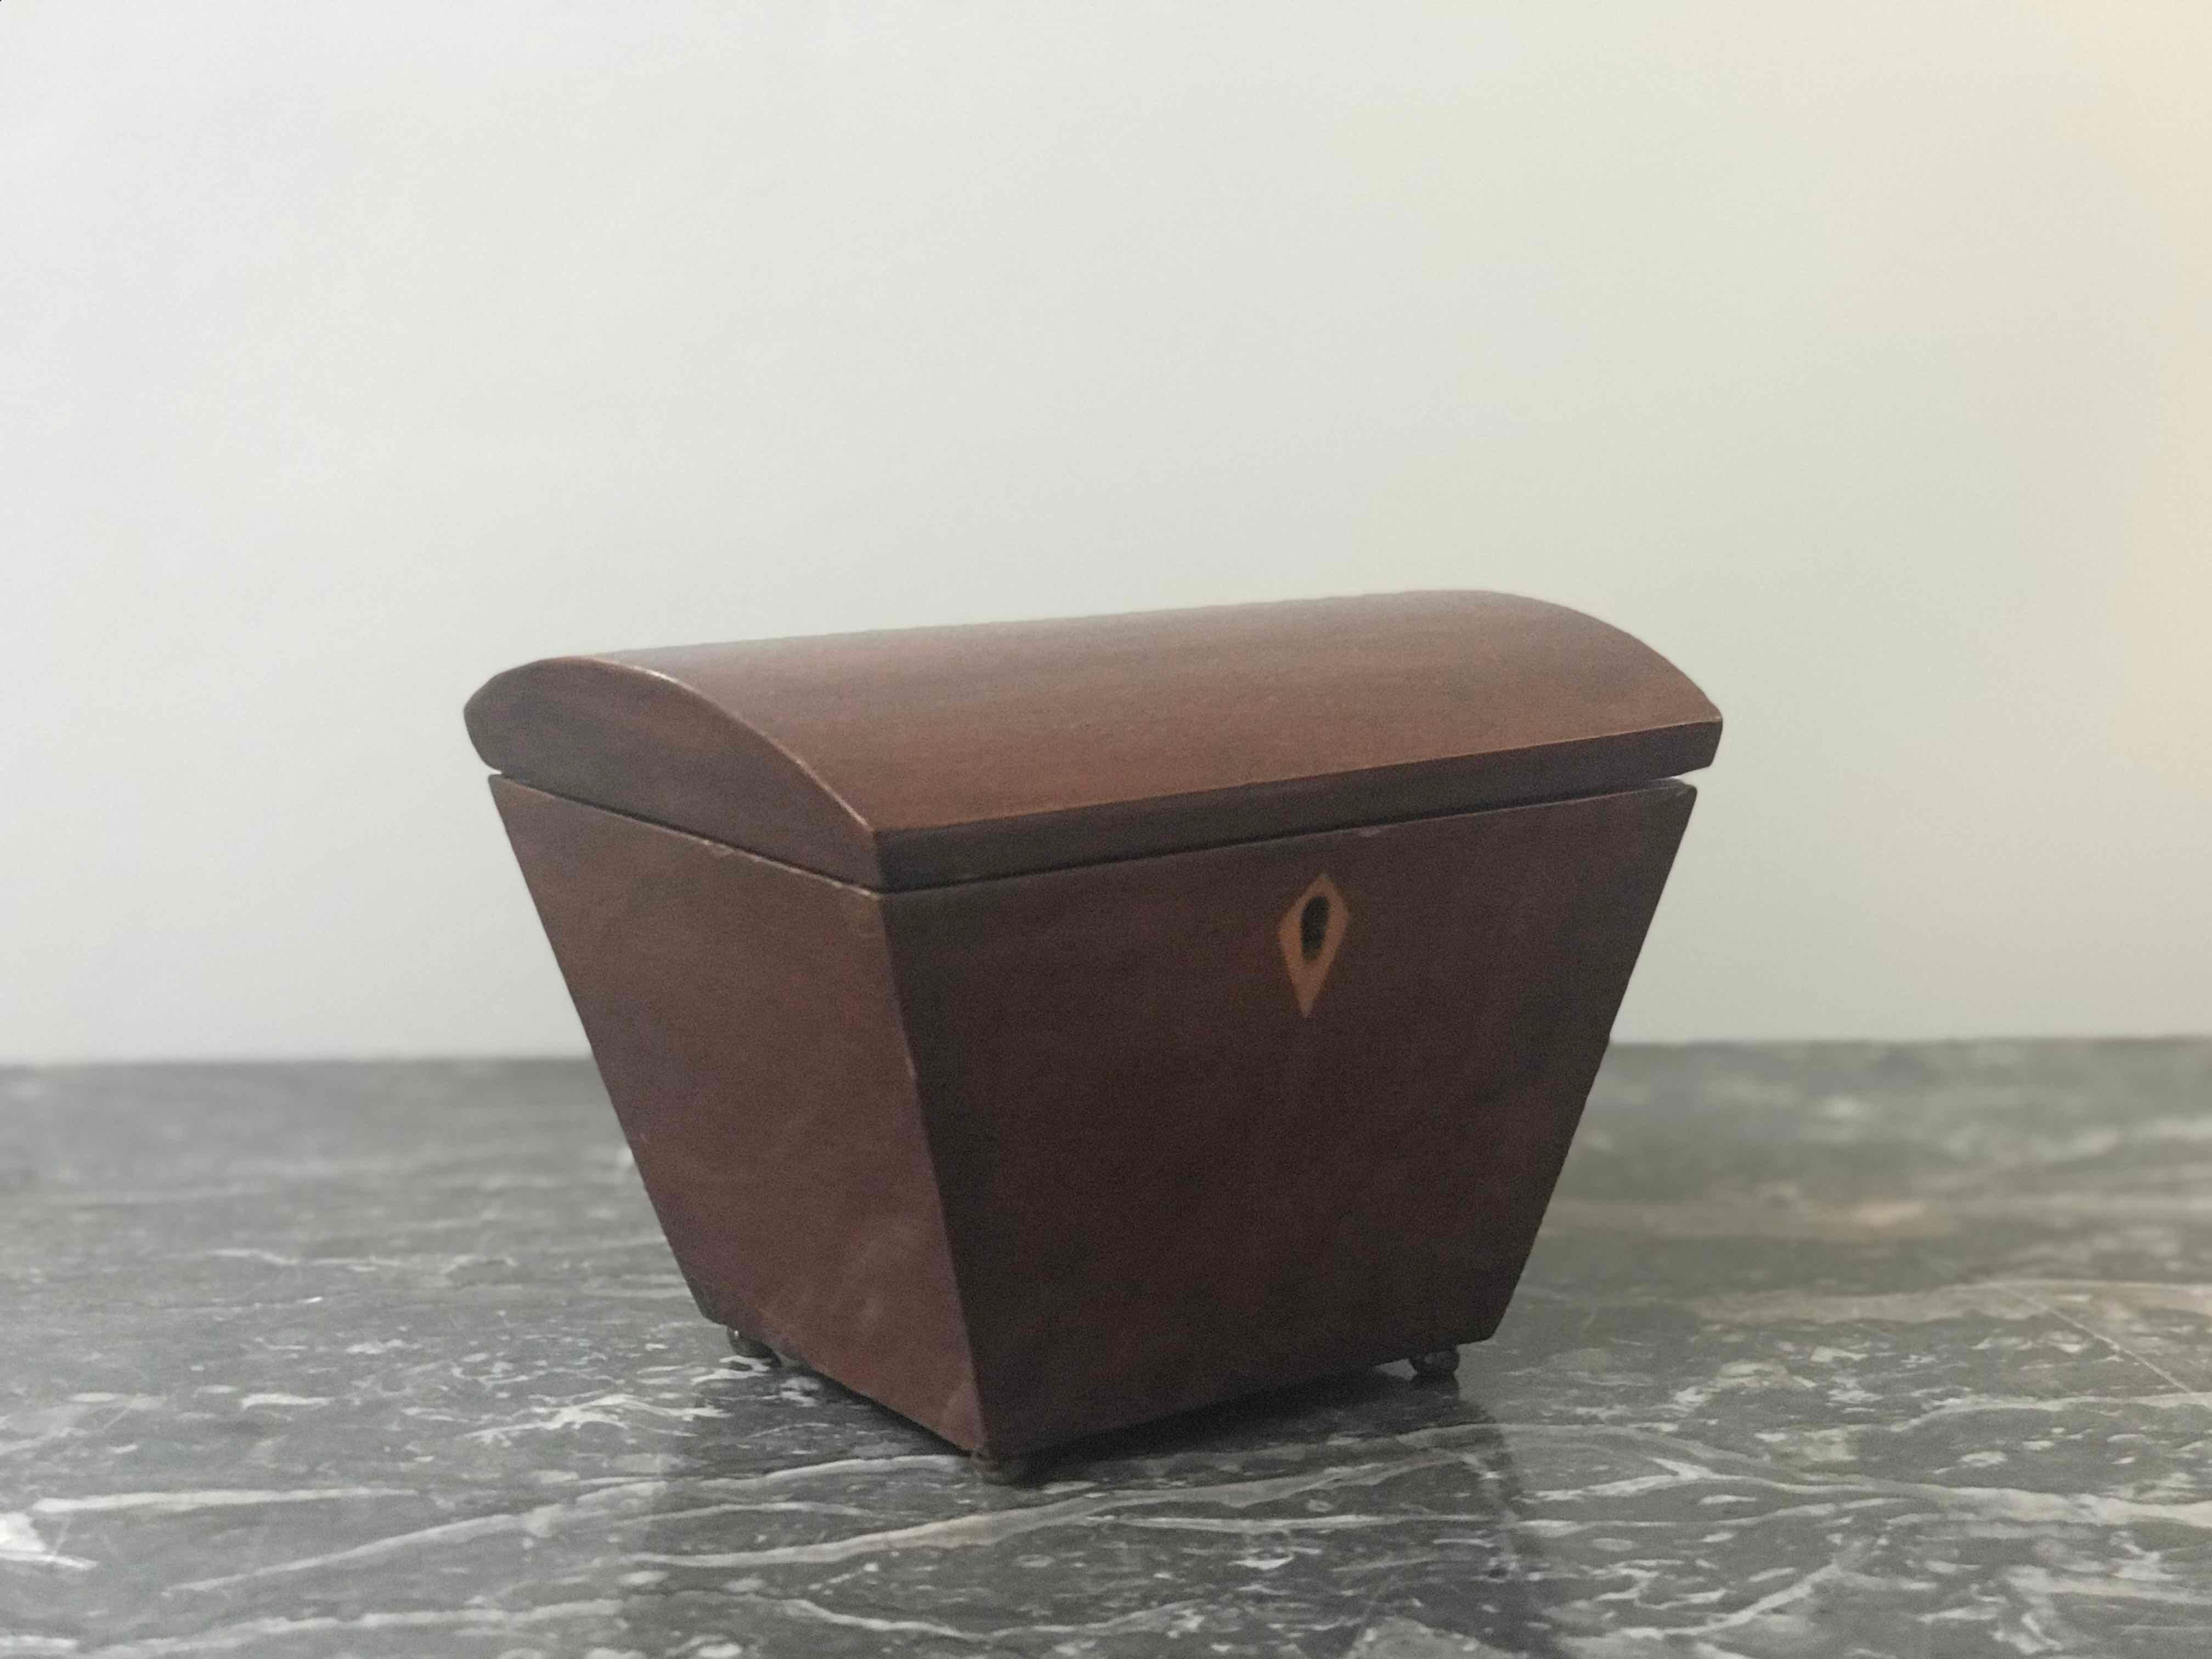 Victorian Small Tapered Tea Caddy Box from England Circa 1840